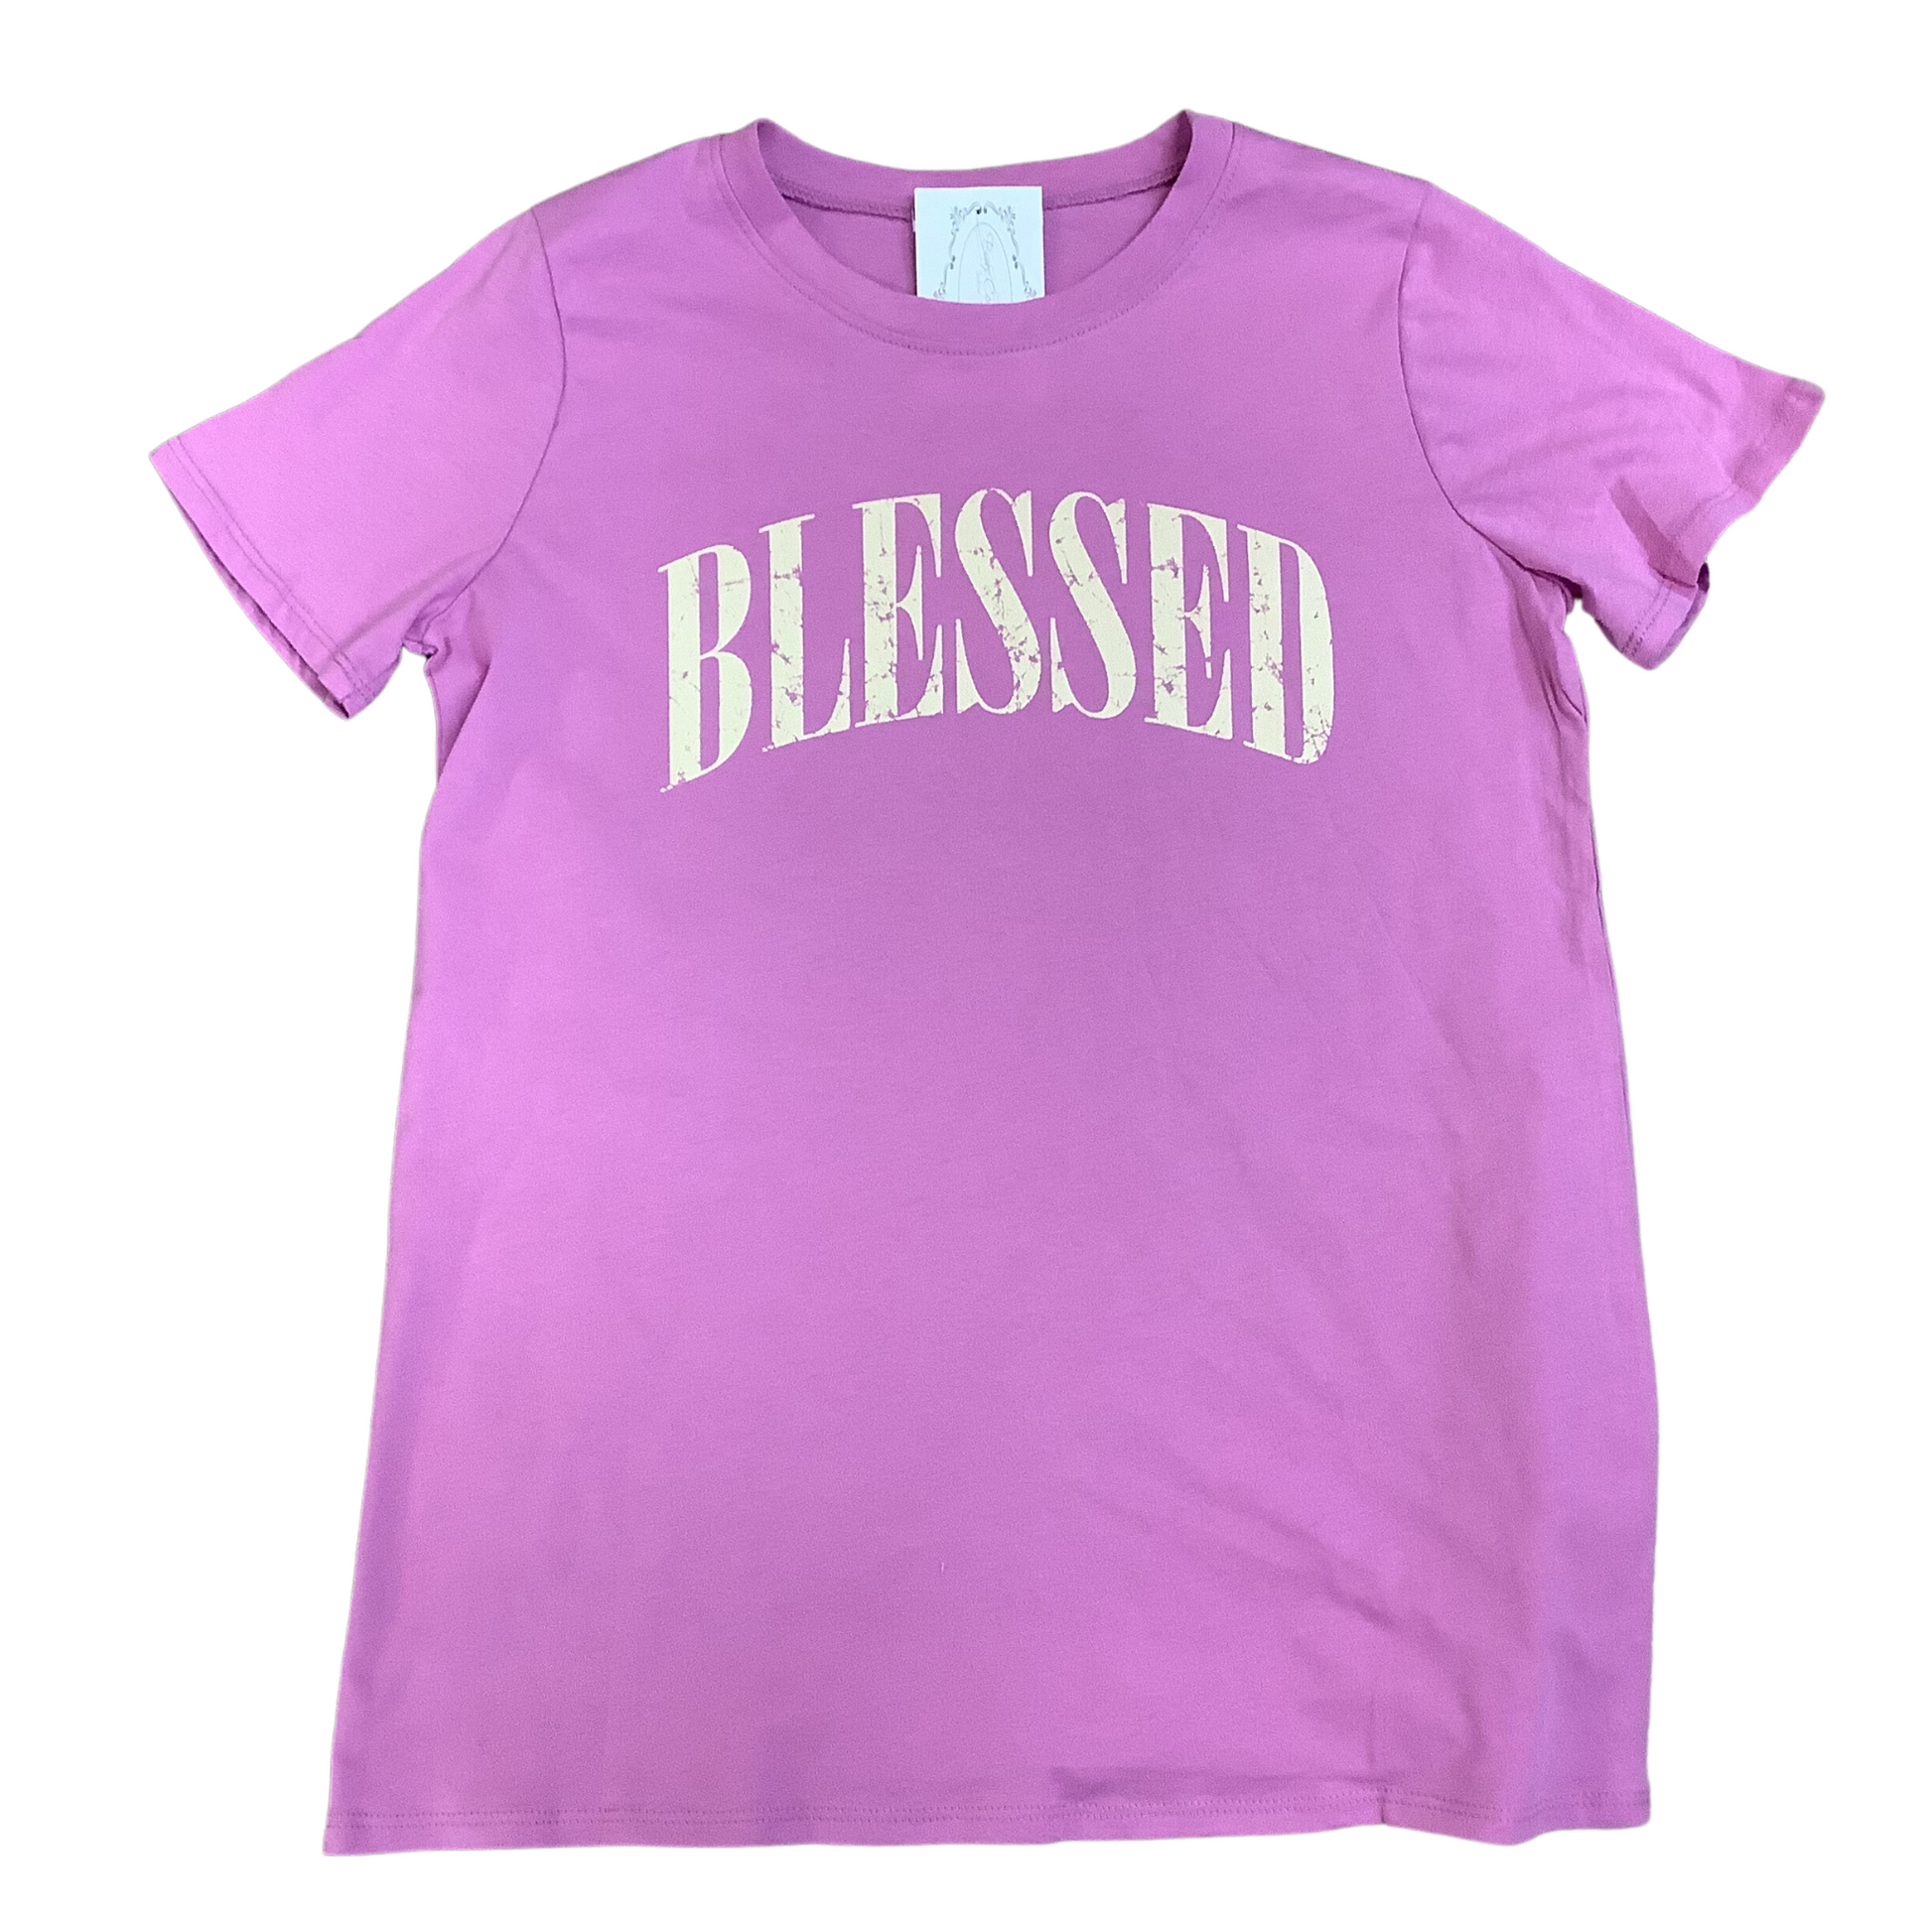 Complete your wardrobe with this stylish Blessed Graphic Tee. Featuring a beautiful pink color and the uplifting word "Blessed", this tee is perfect for everyday looks. The graphic tee is made from quality materials, for a comfortable fit you can rely on.